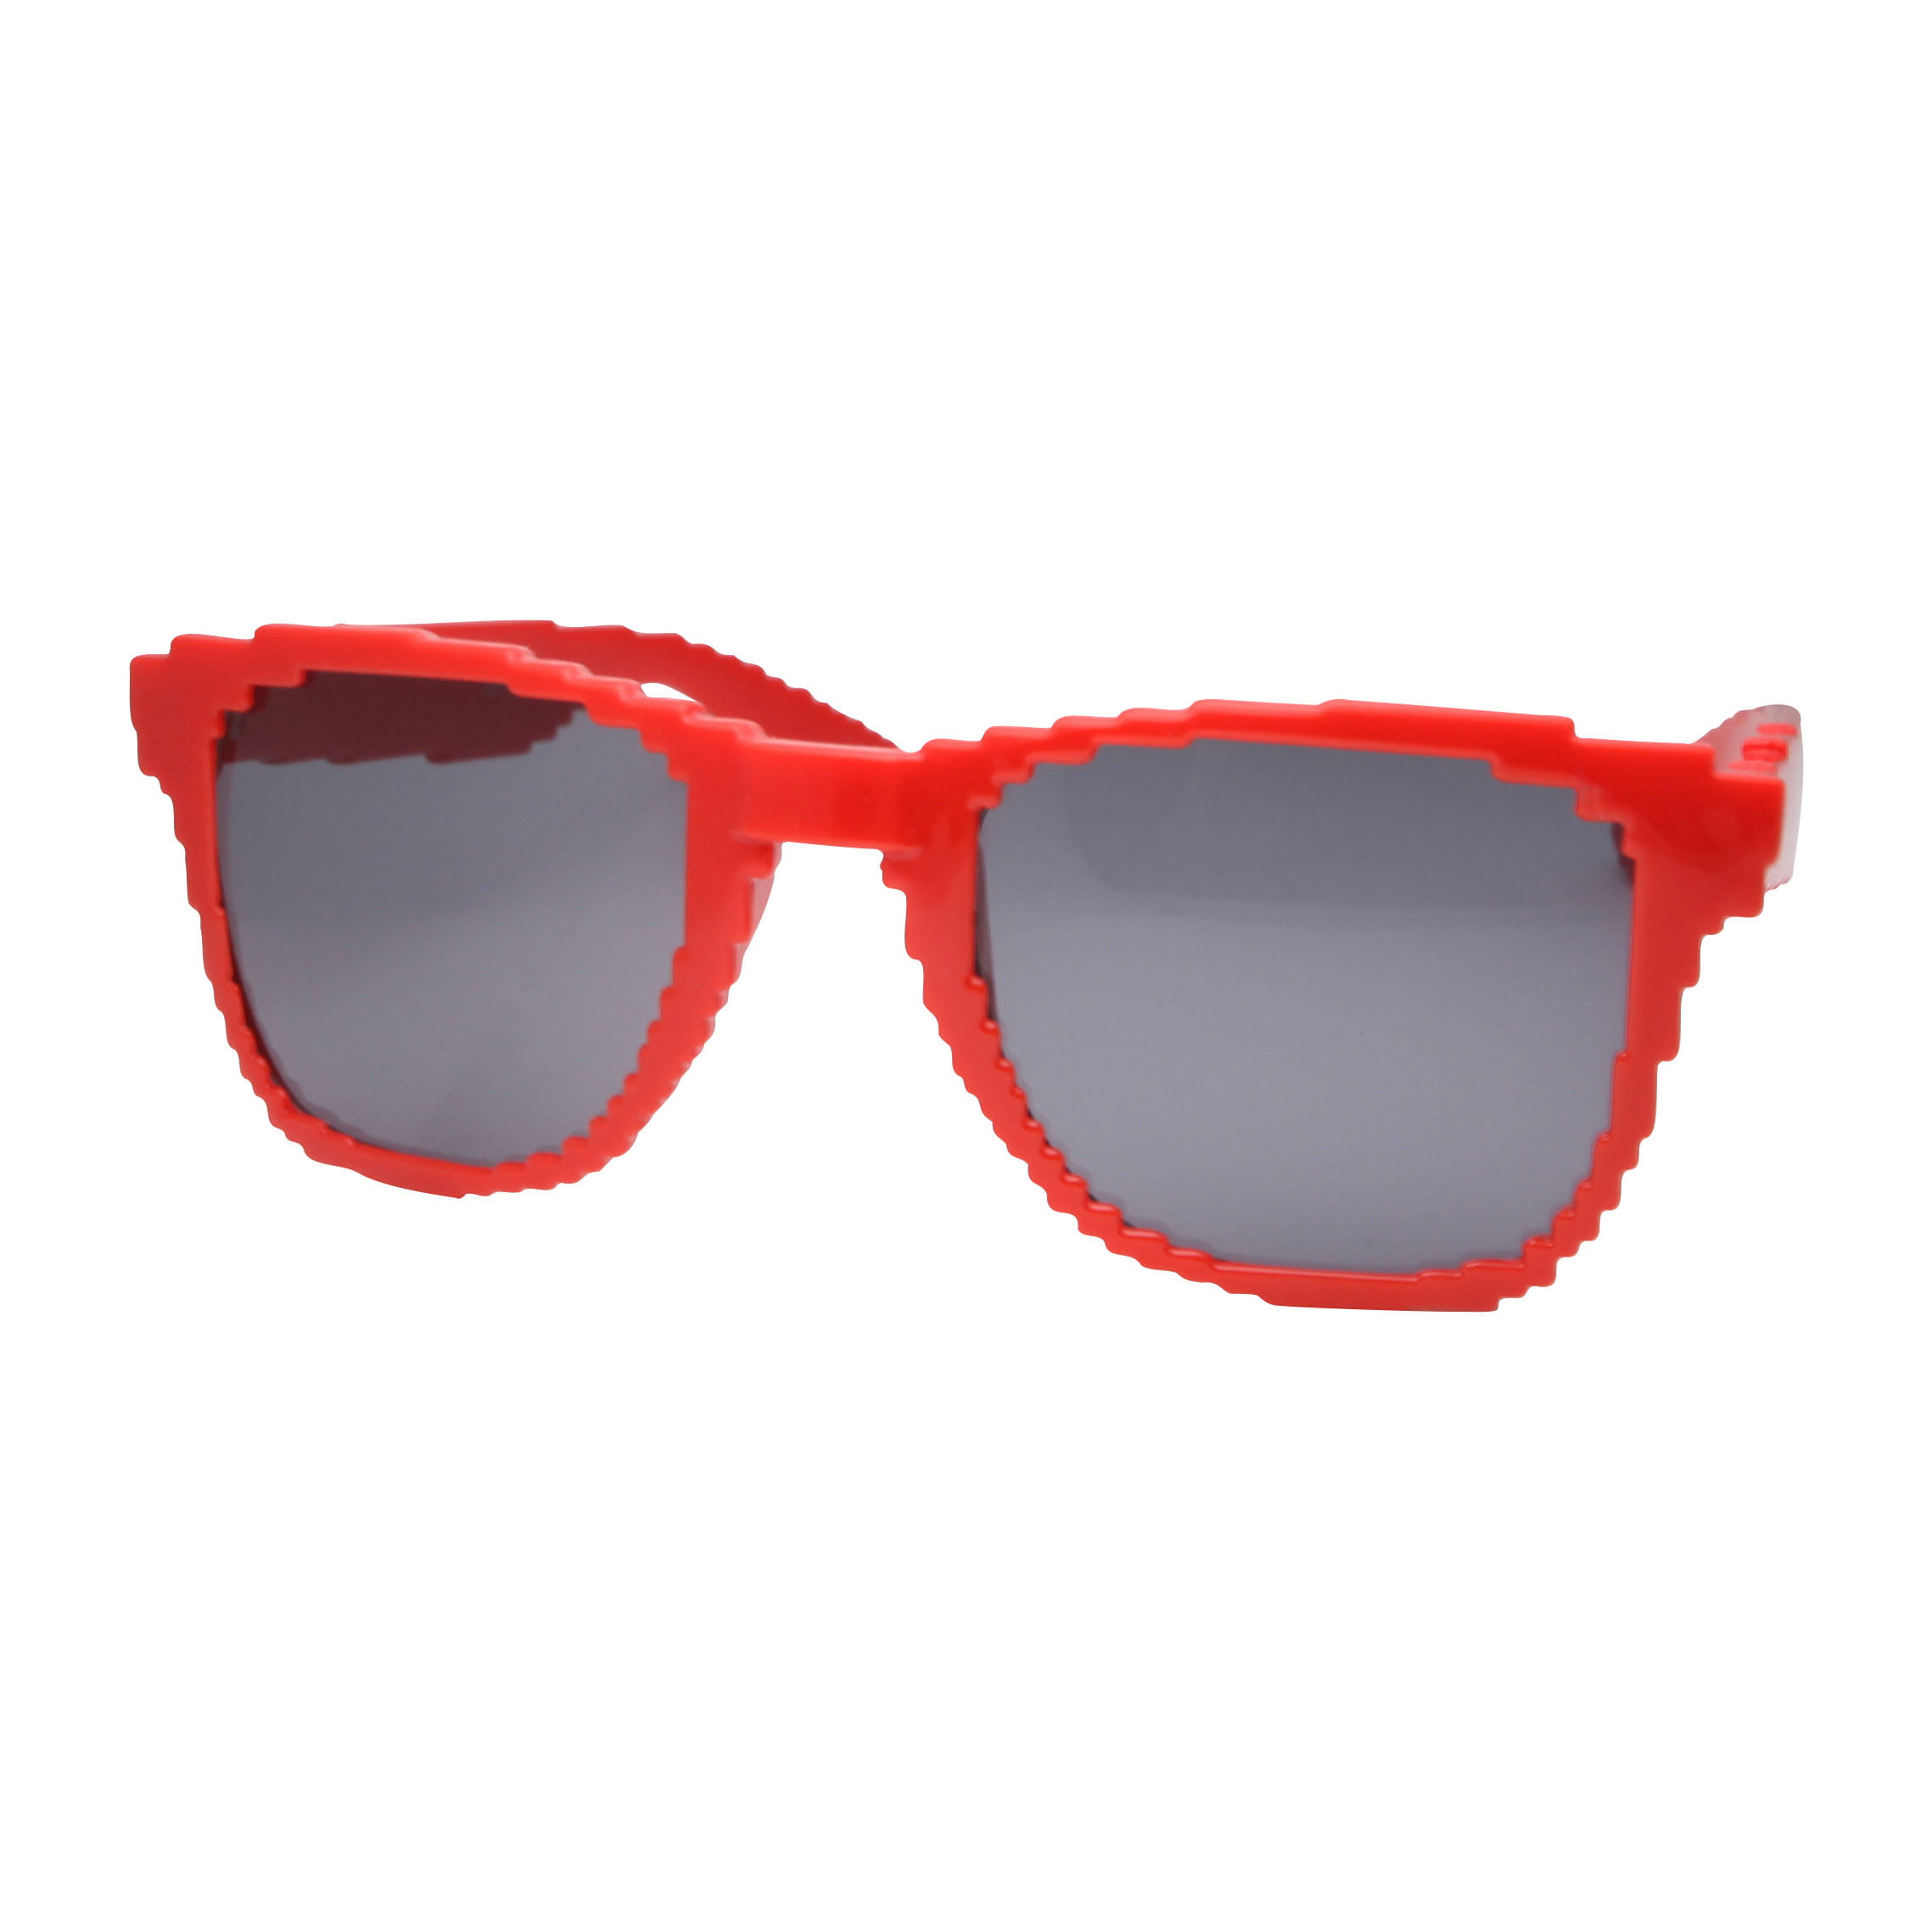 Details about   Janie And Jack Boy's Colorblocked Sunglasses 2 to 4 Years 200386849 Black Square 